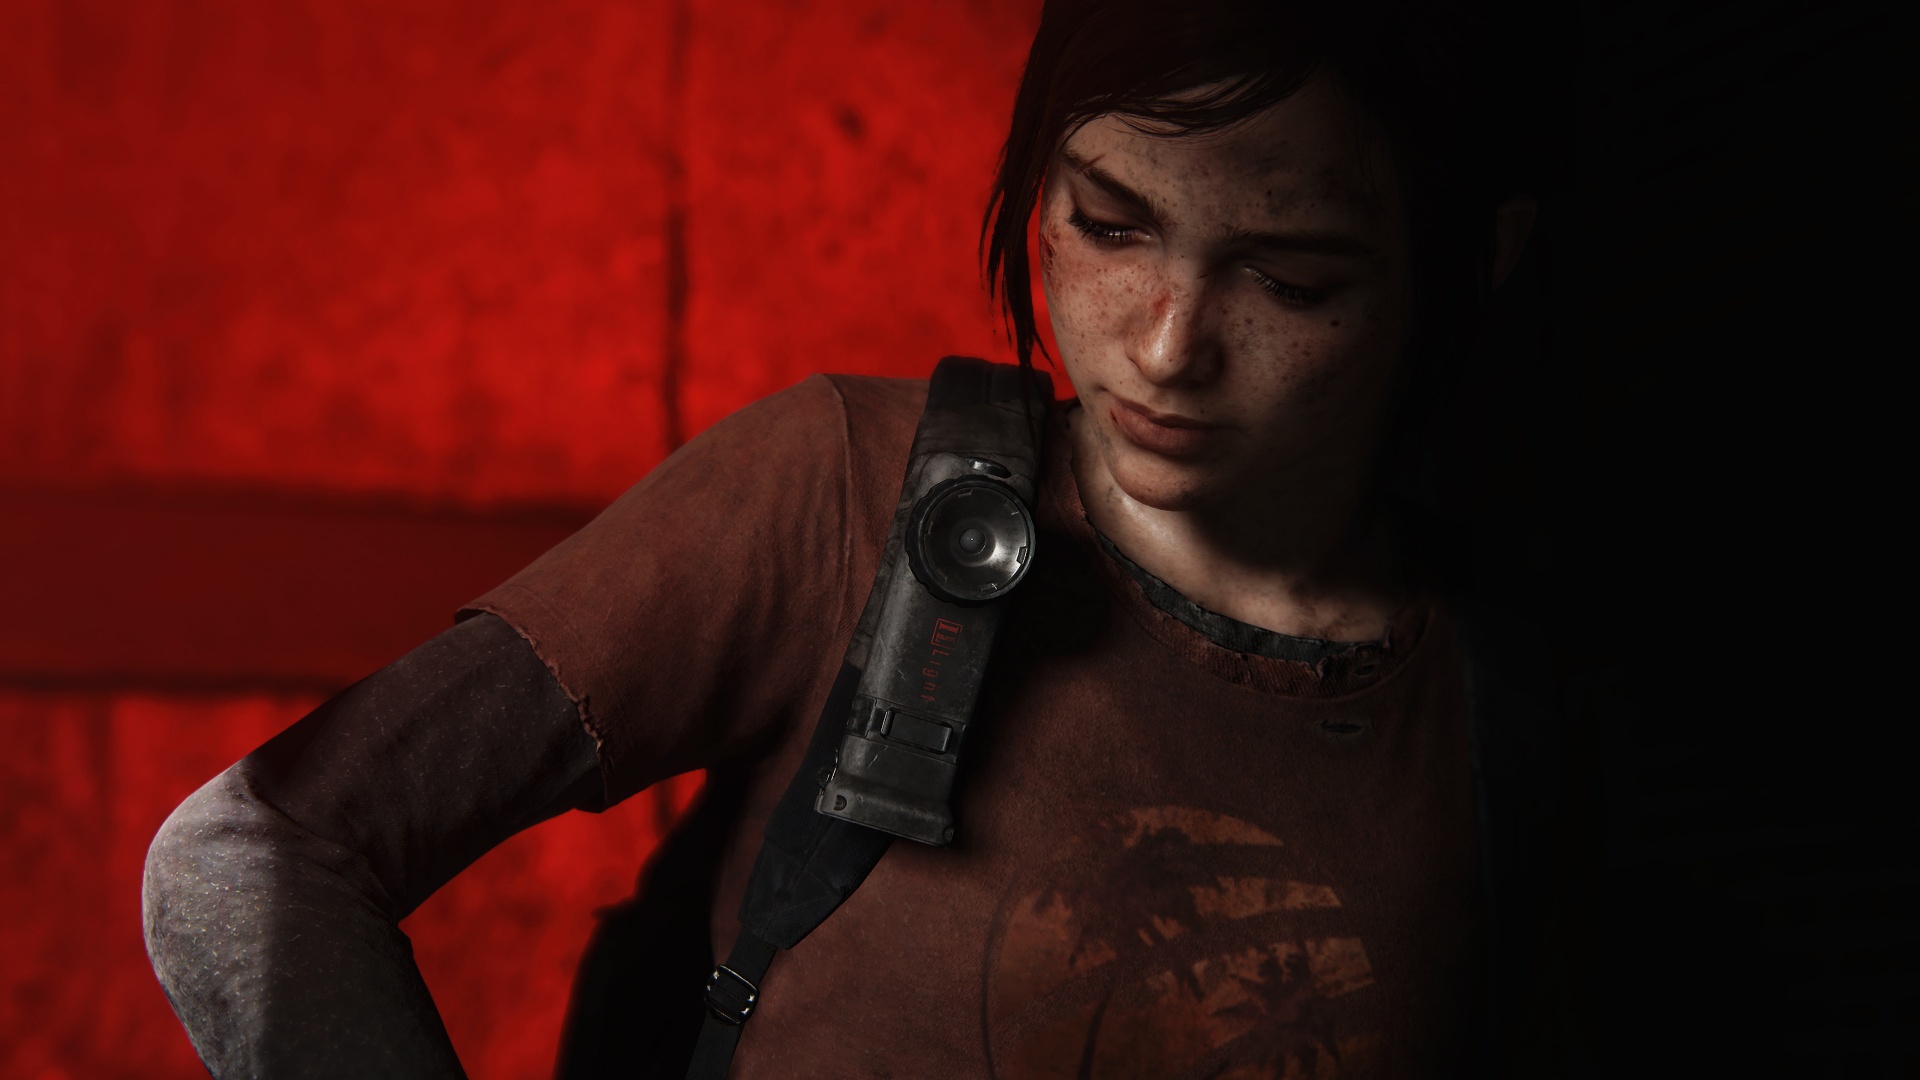 Ellie from The Last of Us Wallpaper 4k HD ID:11766